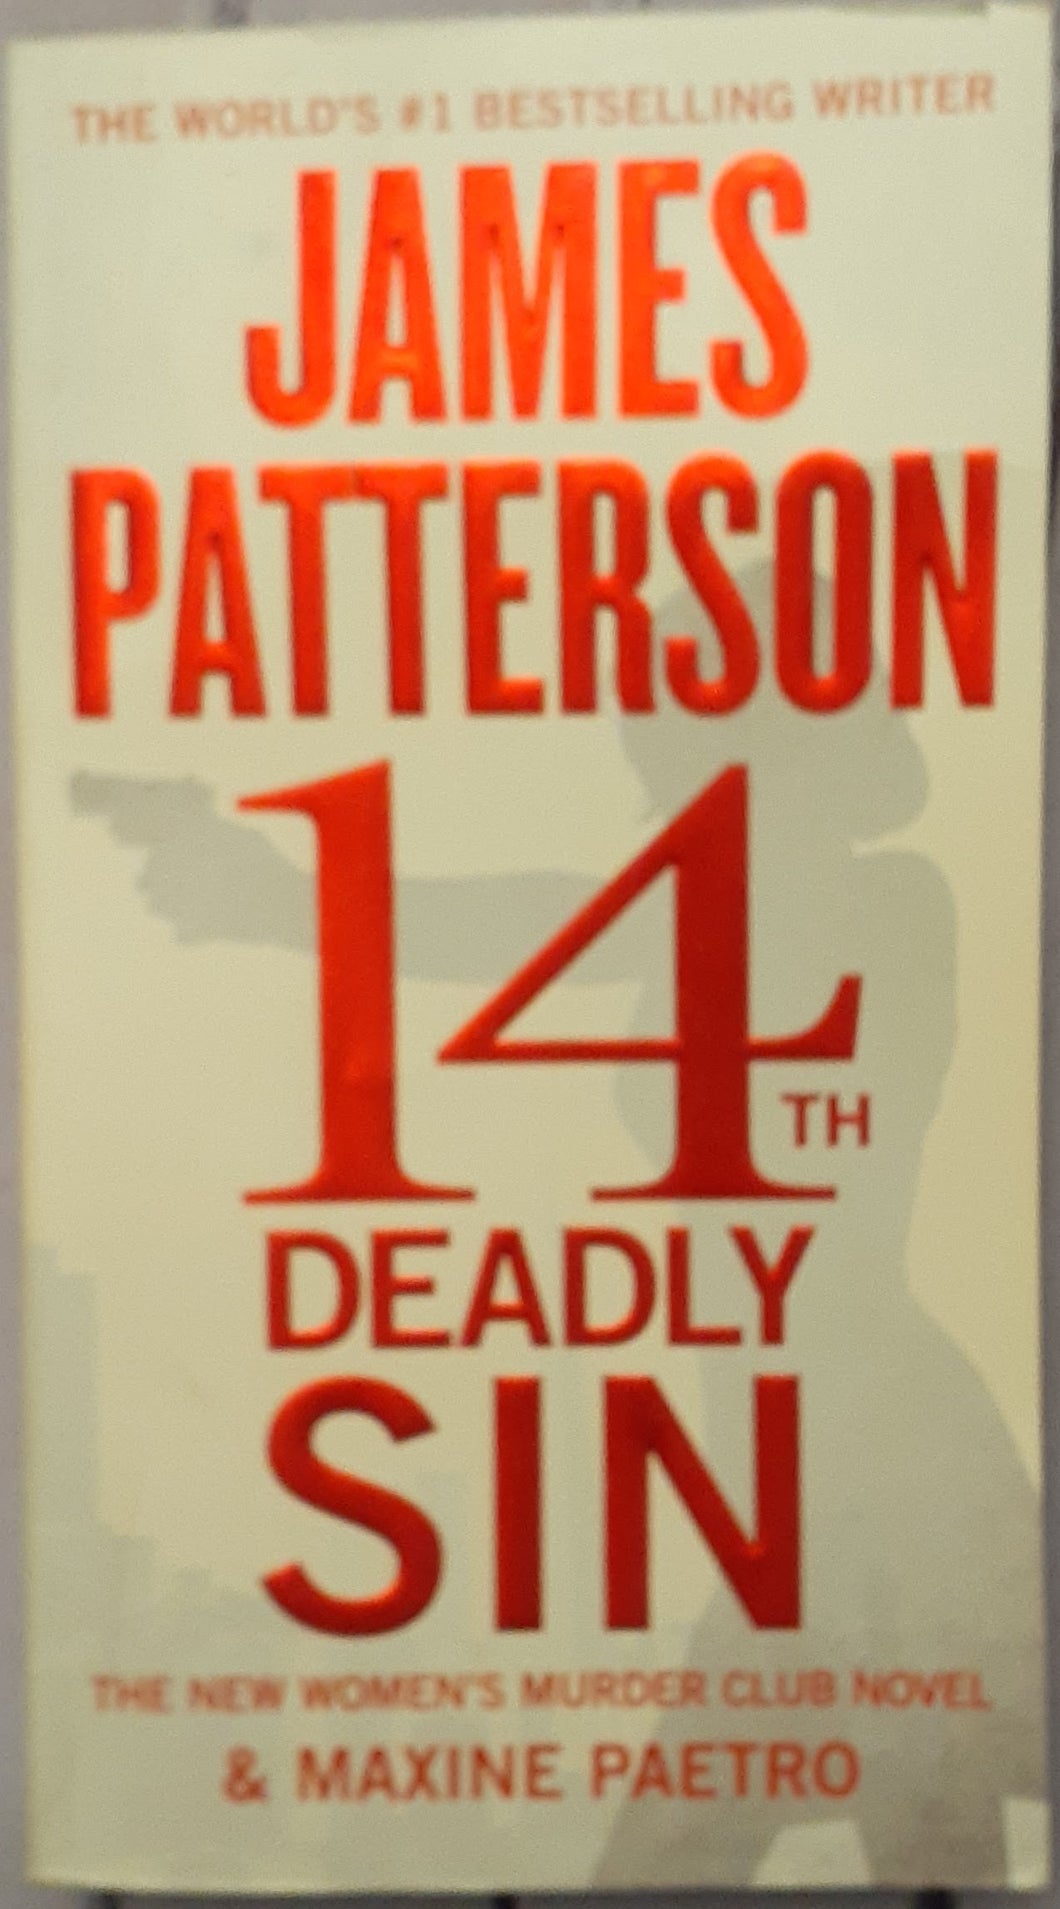 14th Deadly Sin